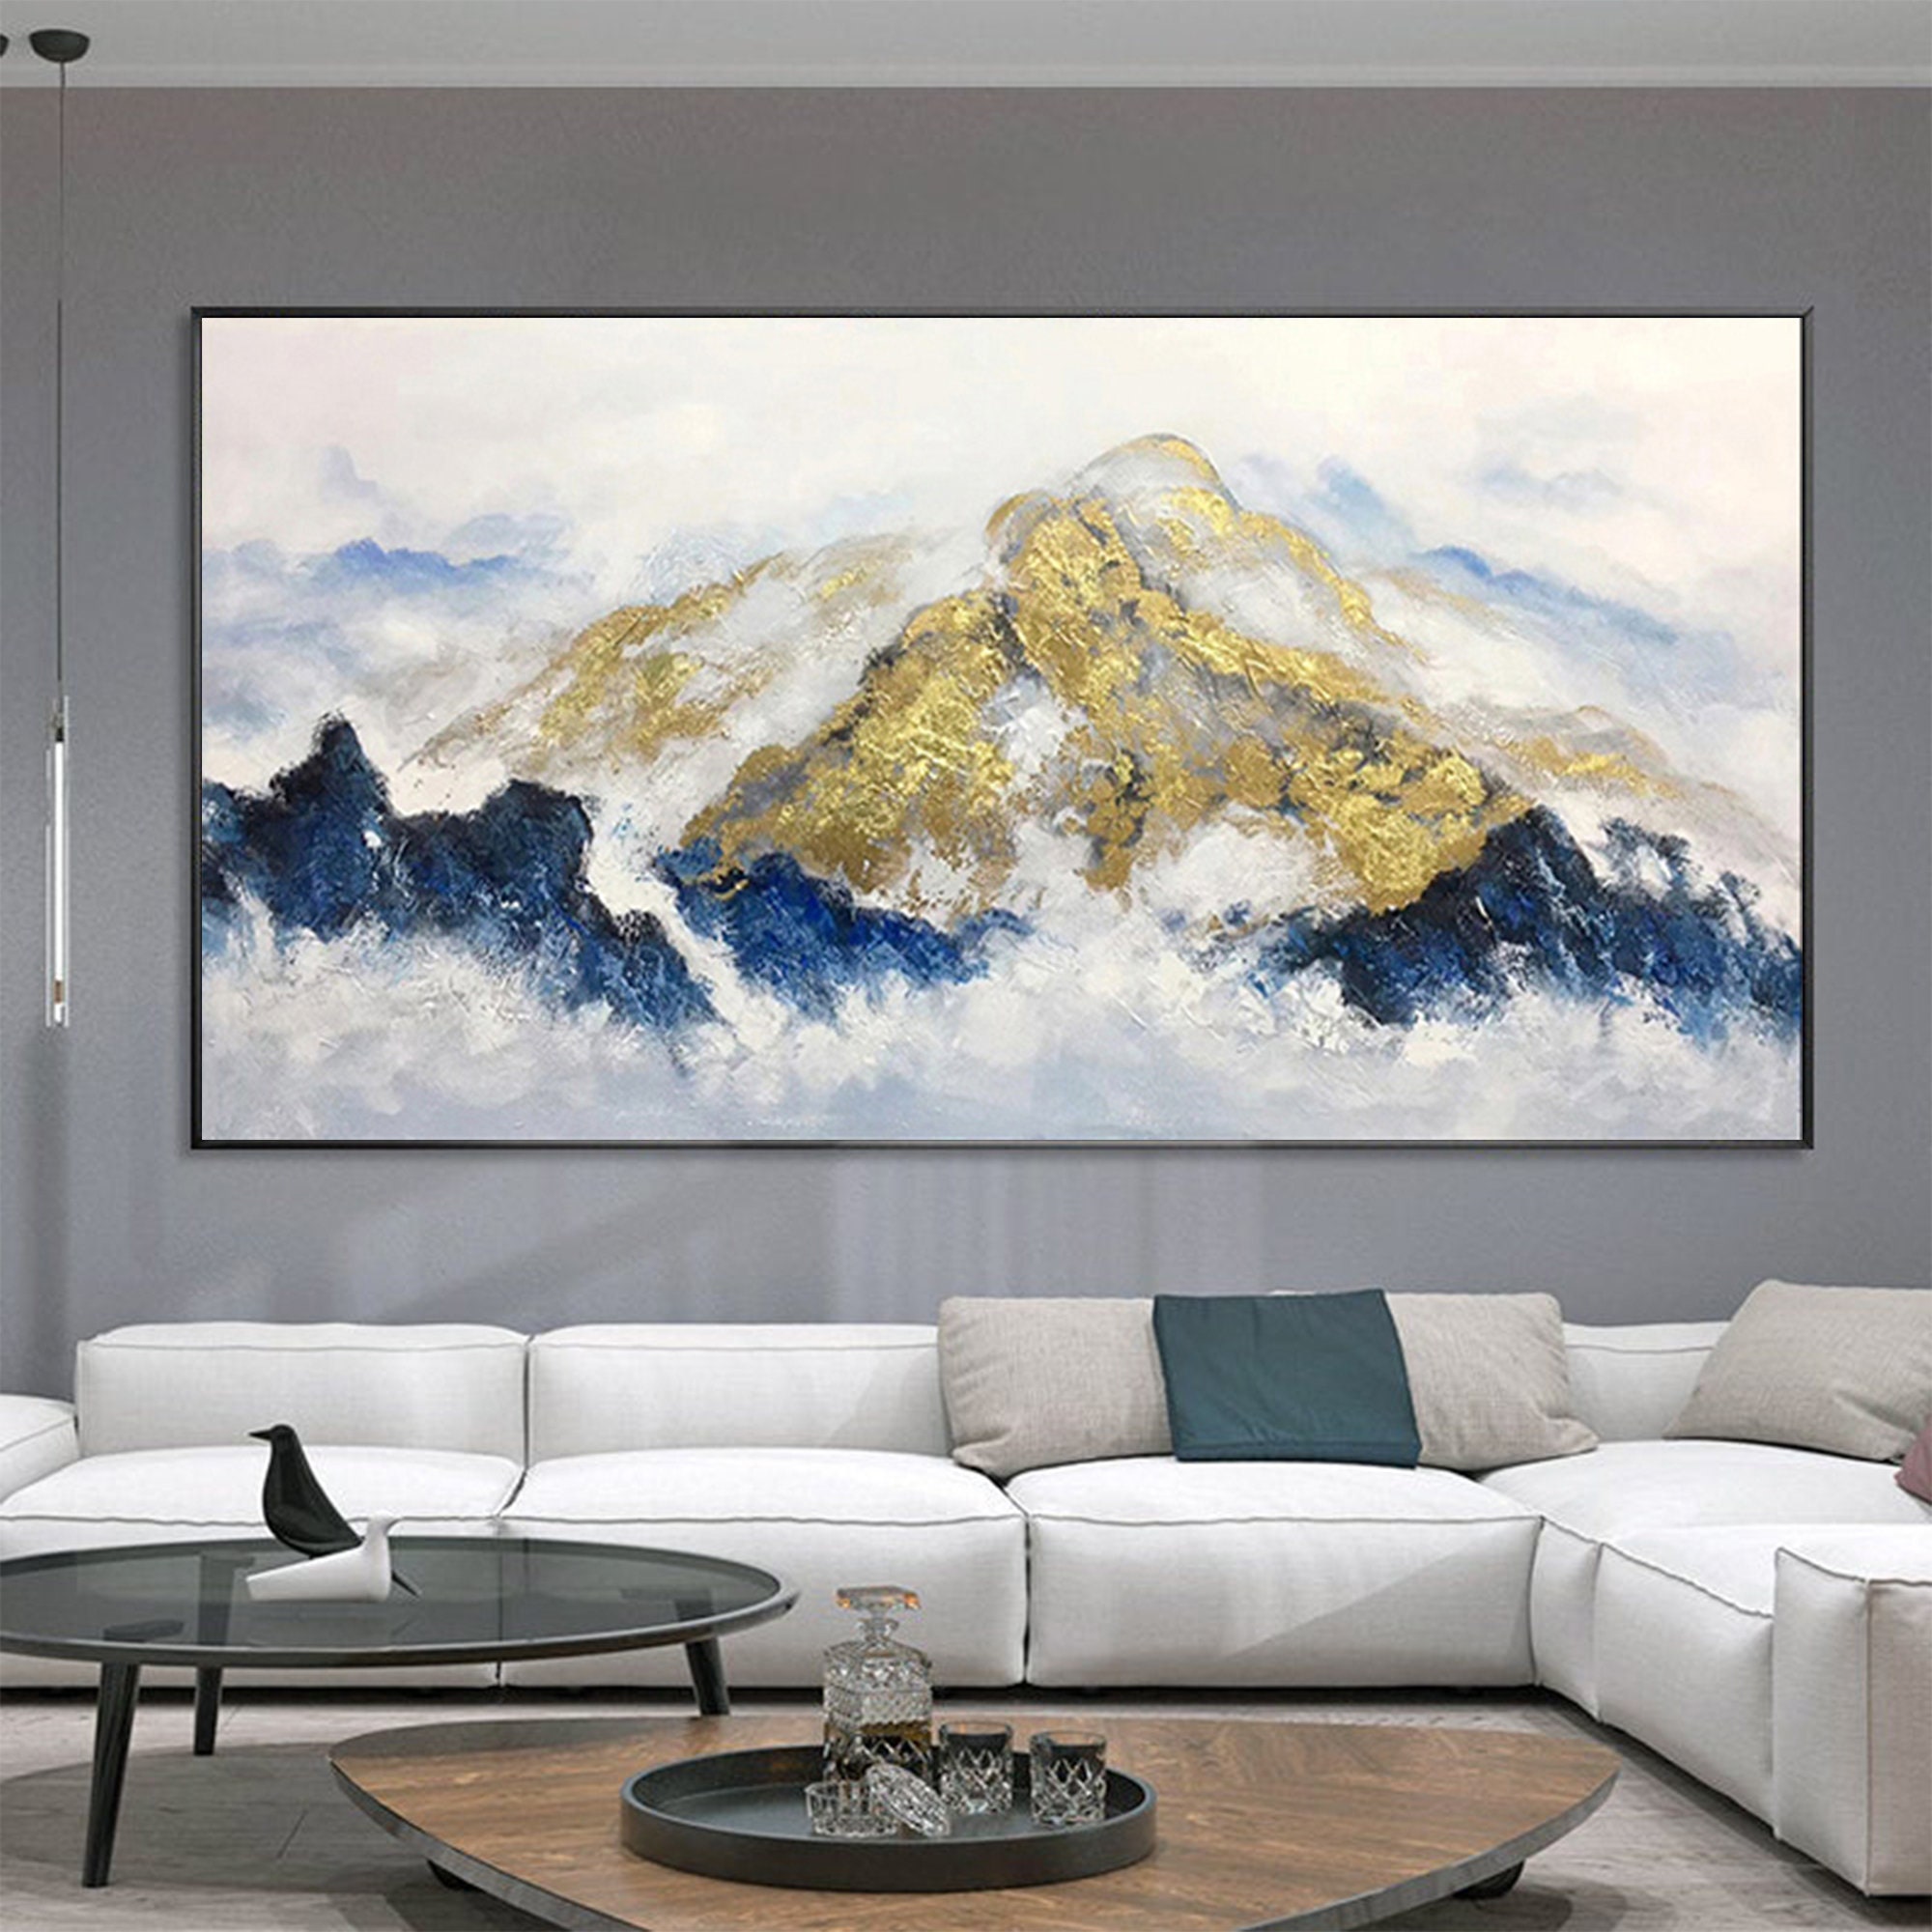 Large Gold Leaf Mountain Oil Painting on Canvas Original - Etsy